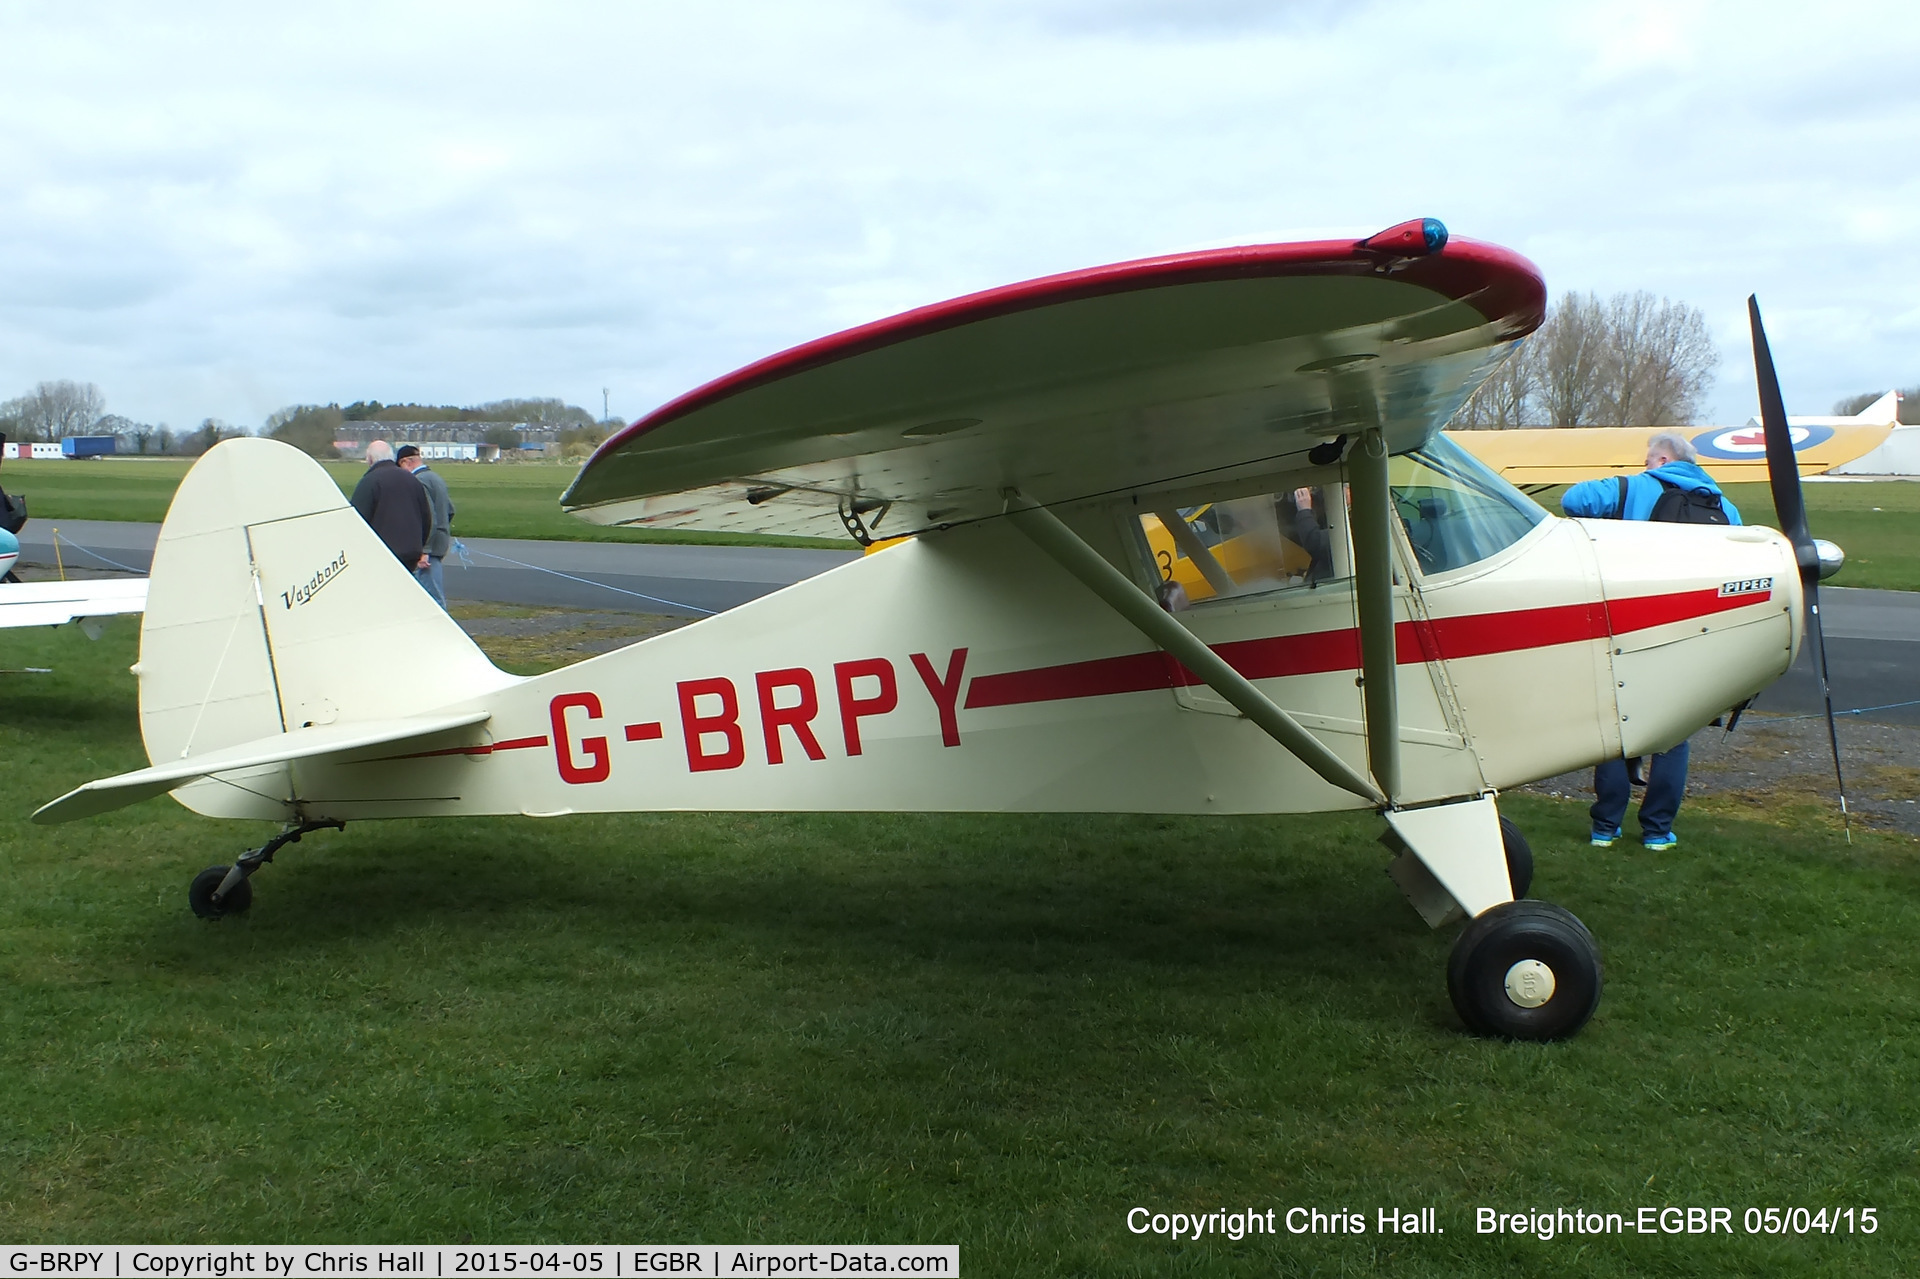 G-BRPY, 1948 Piper PA-15 Vagabond Vagabond C/N 15-141, at the Easter Homebuilt Aircraft Fly-in